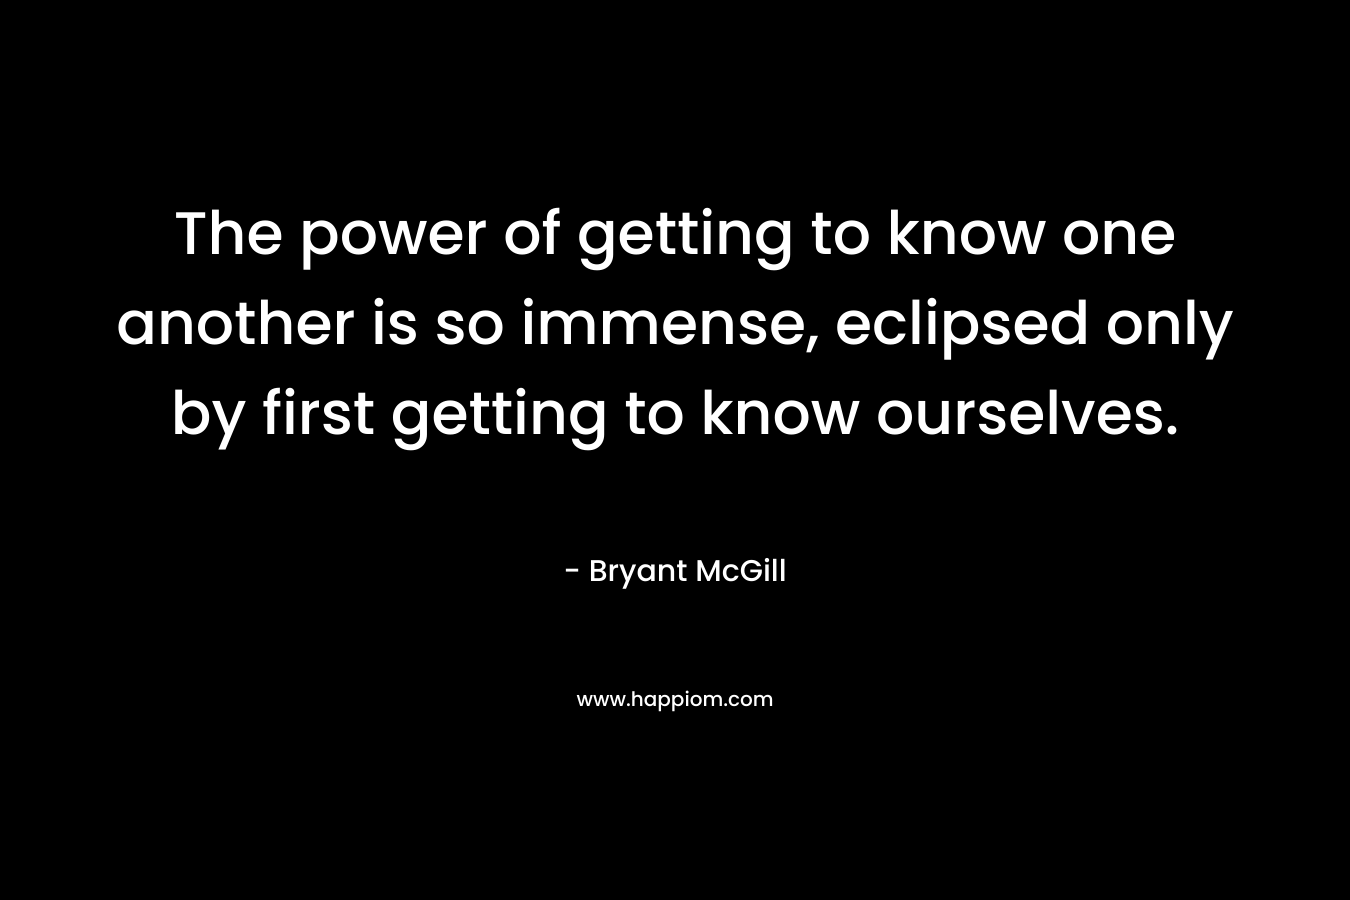 The power of getting to know one another is so immense, eclipsed only by first getting to know ourselves.